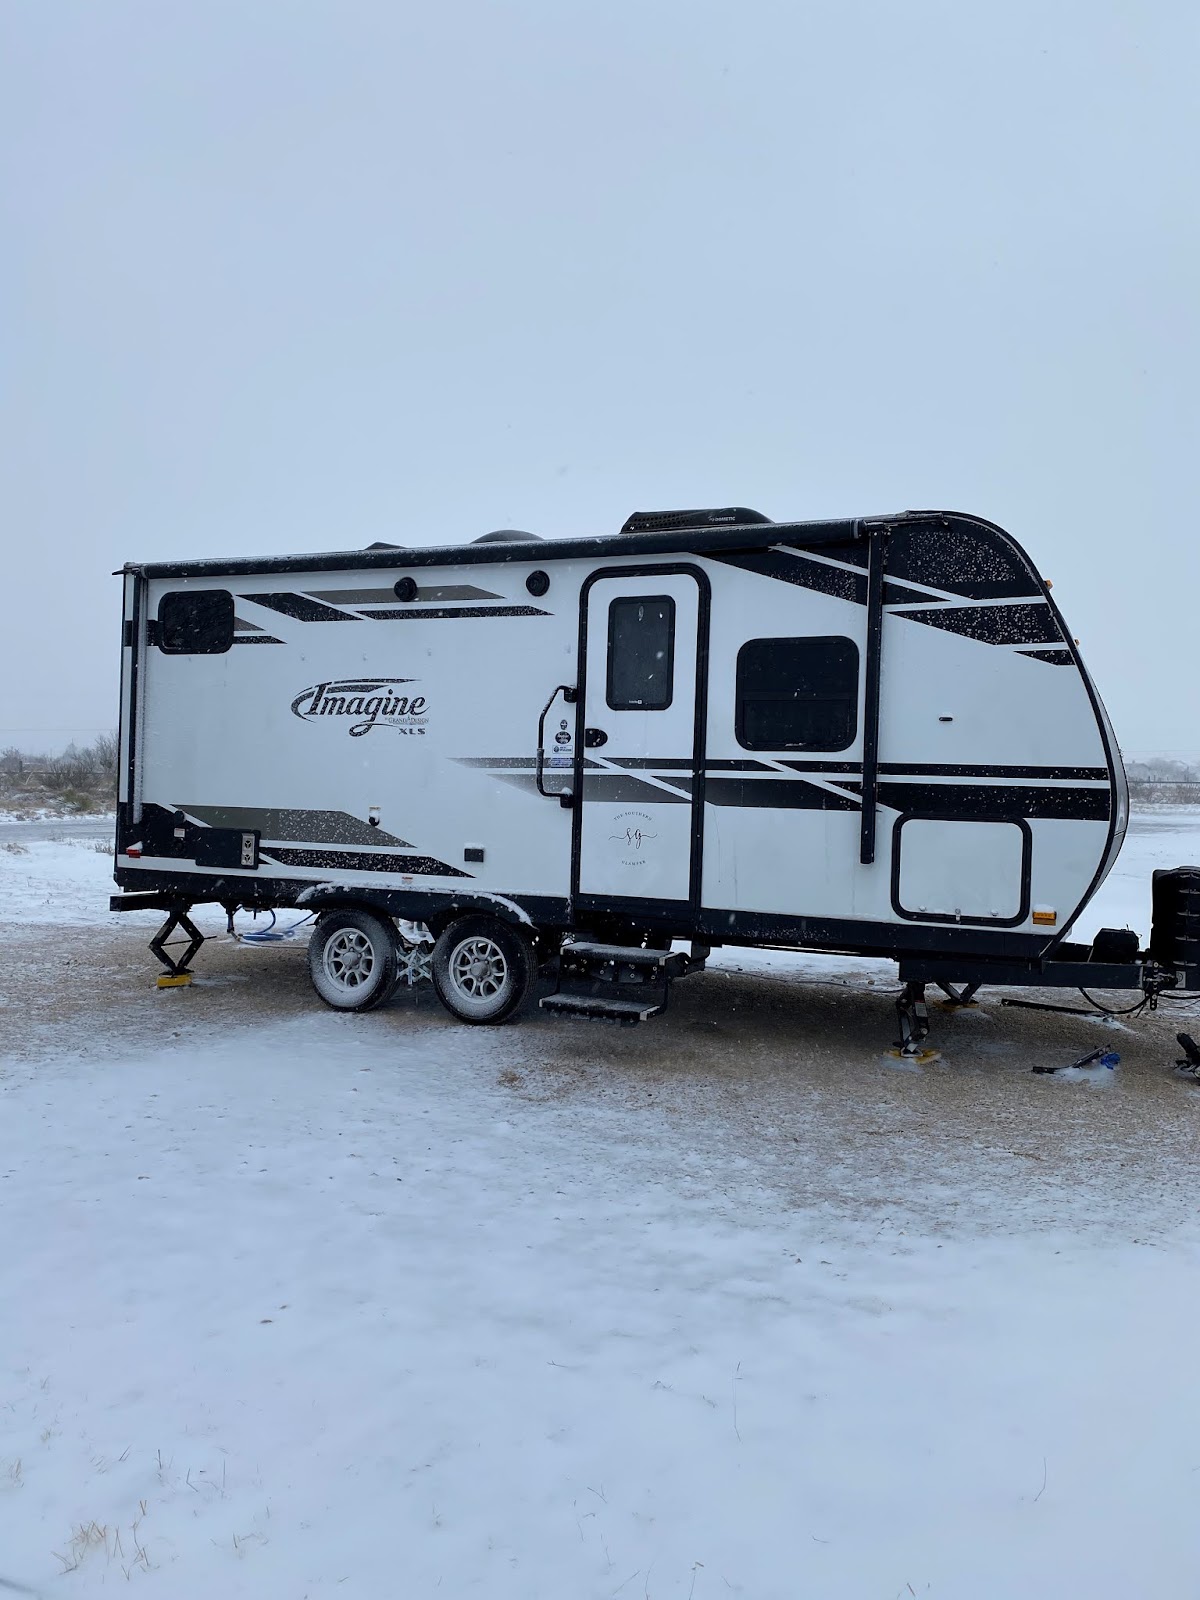 Winter Camping - Why Do It???